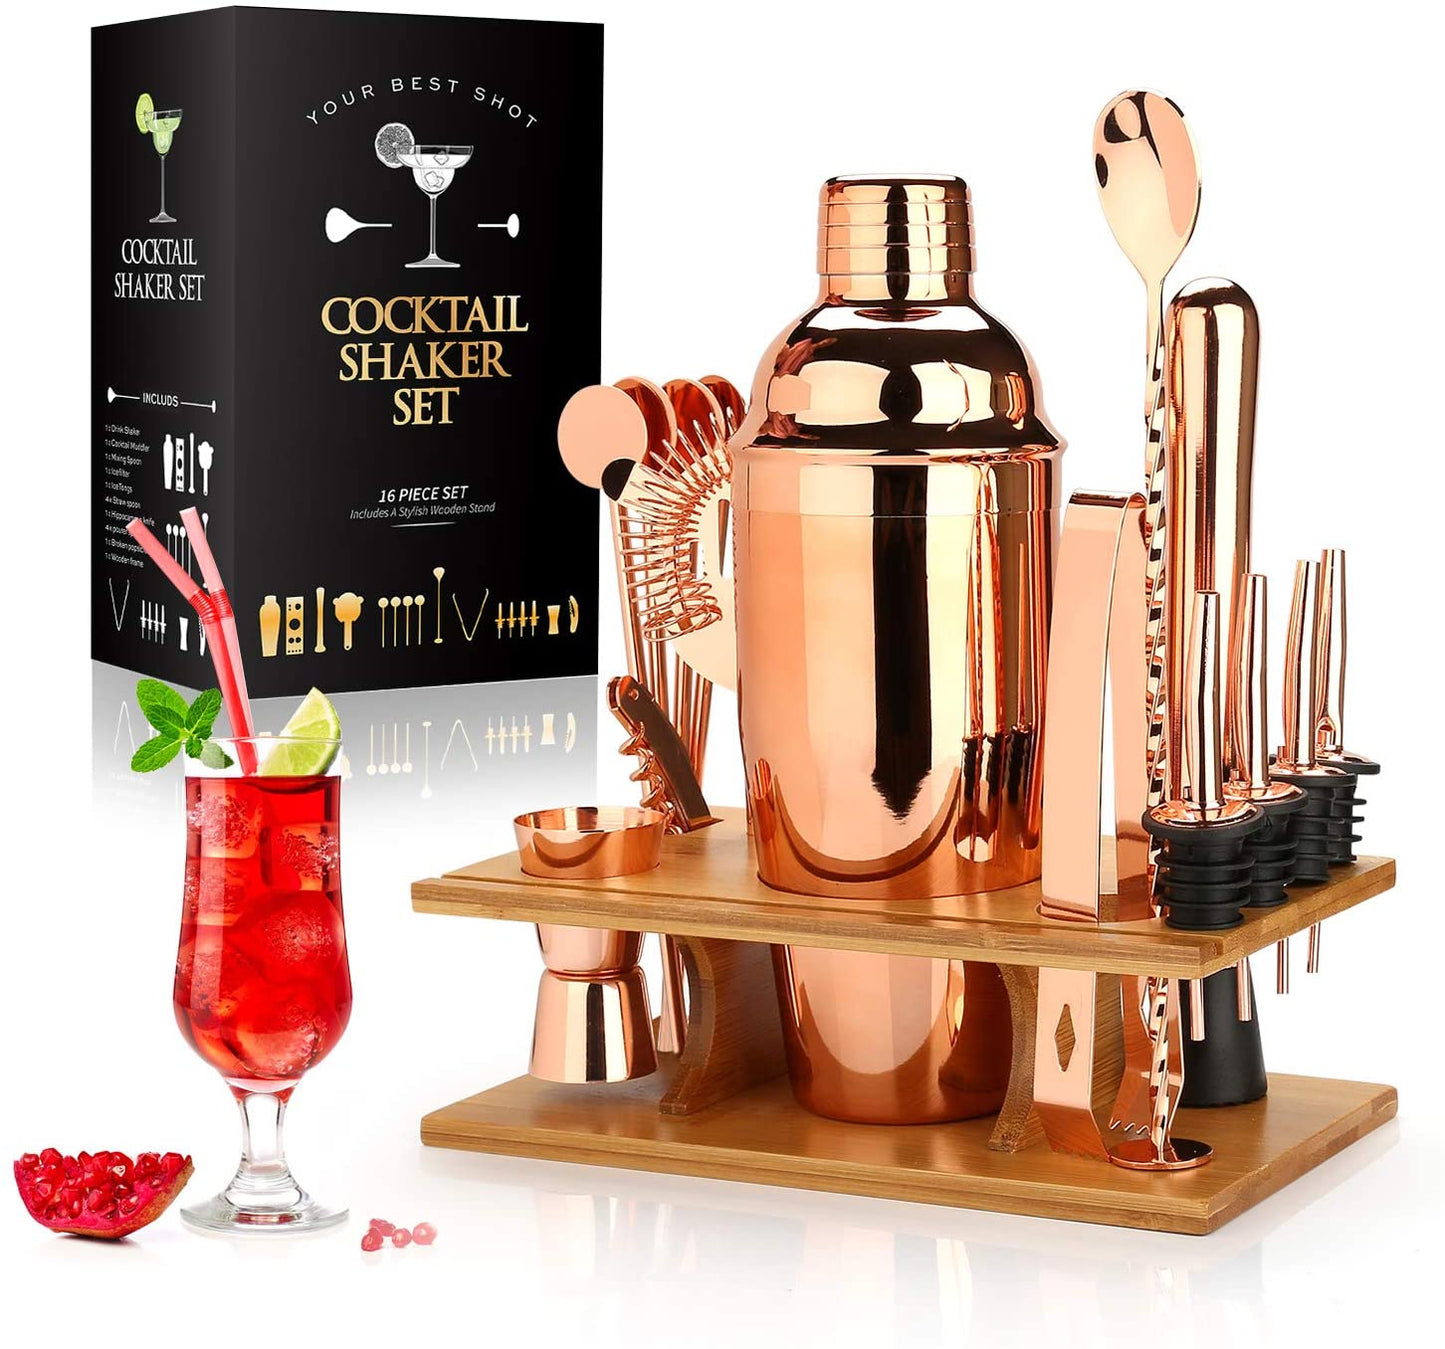 Cocktail Shaker Making Set,16pcs Bartender Kit For Mixer Wine Martini, Stainless Steel Bars Tool, Home Drink Party Accessories*